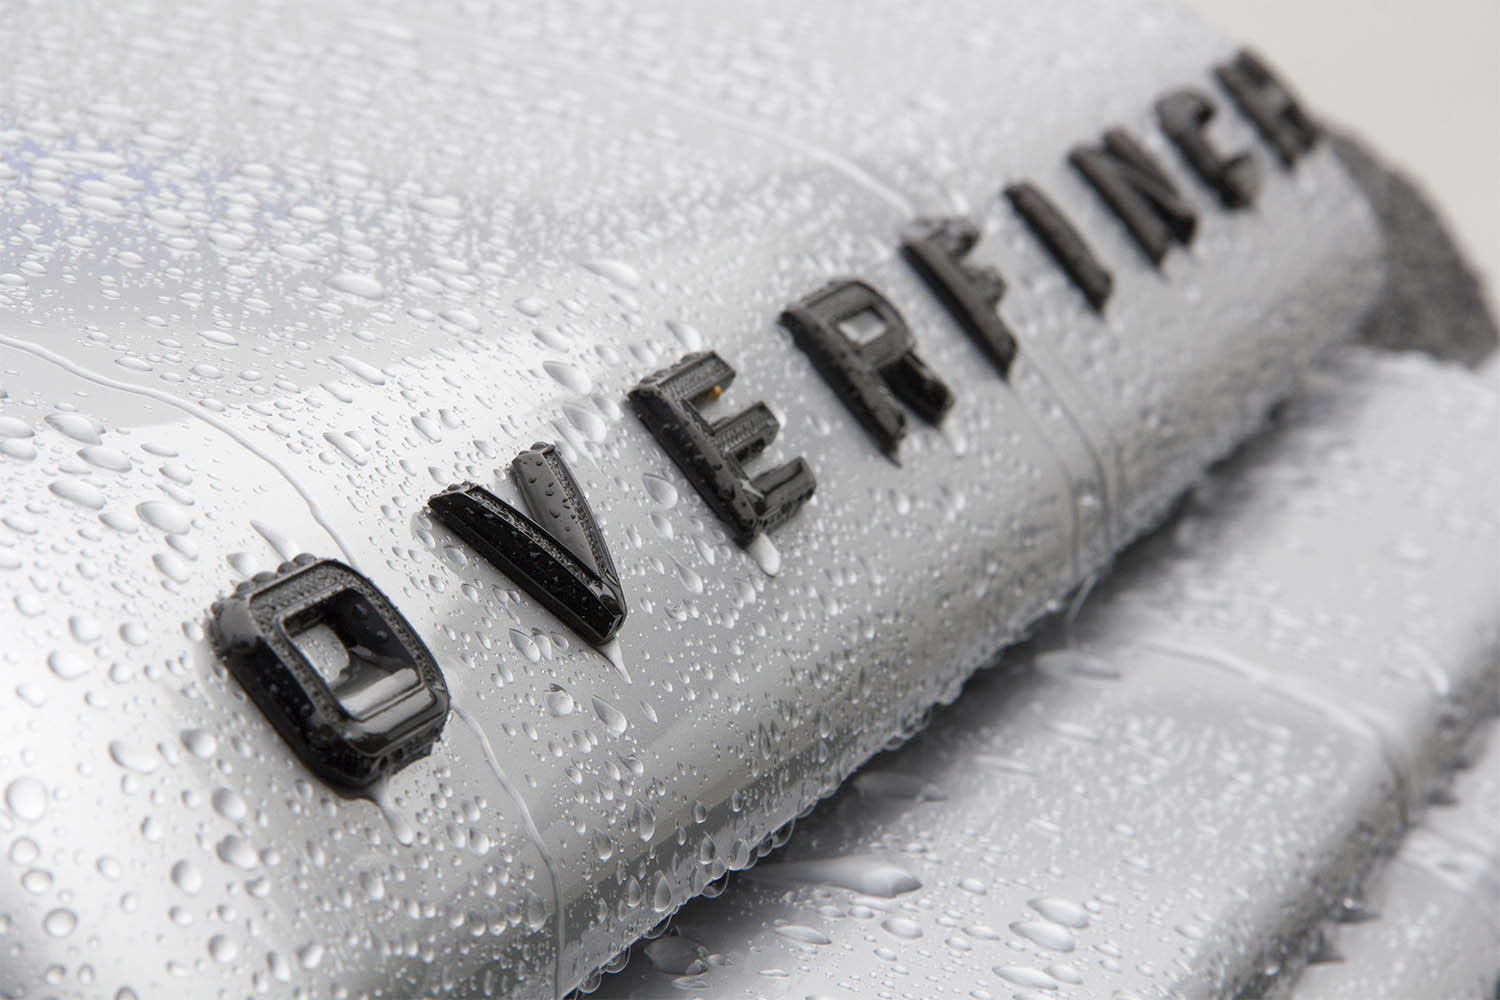 Overfinch Land Rover Defender Anniversary Edition